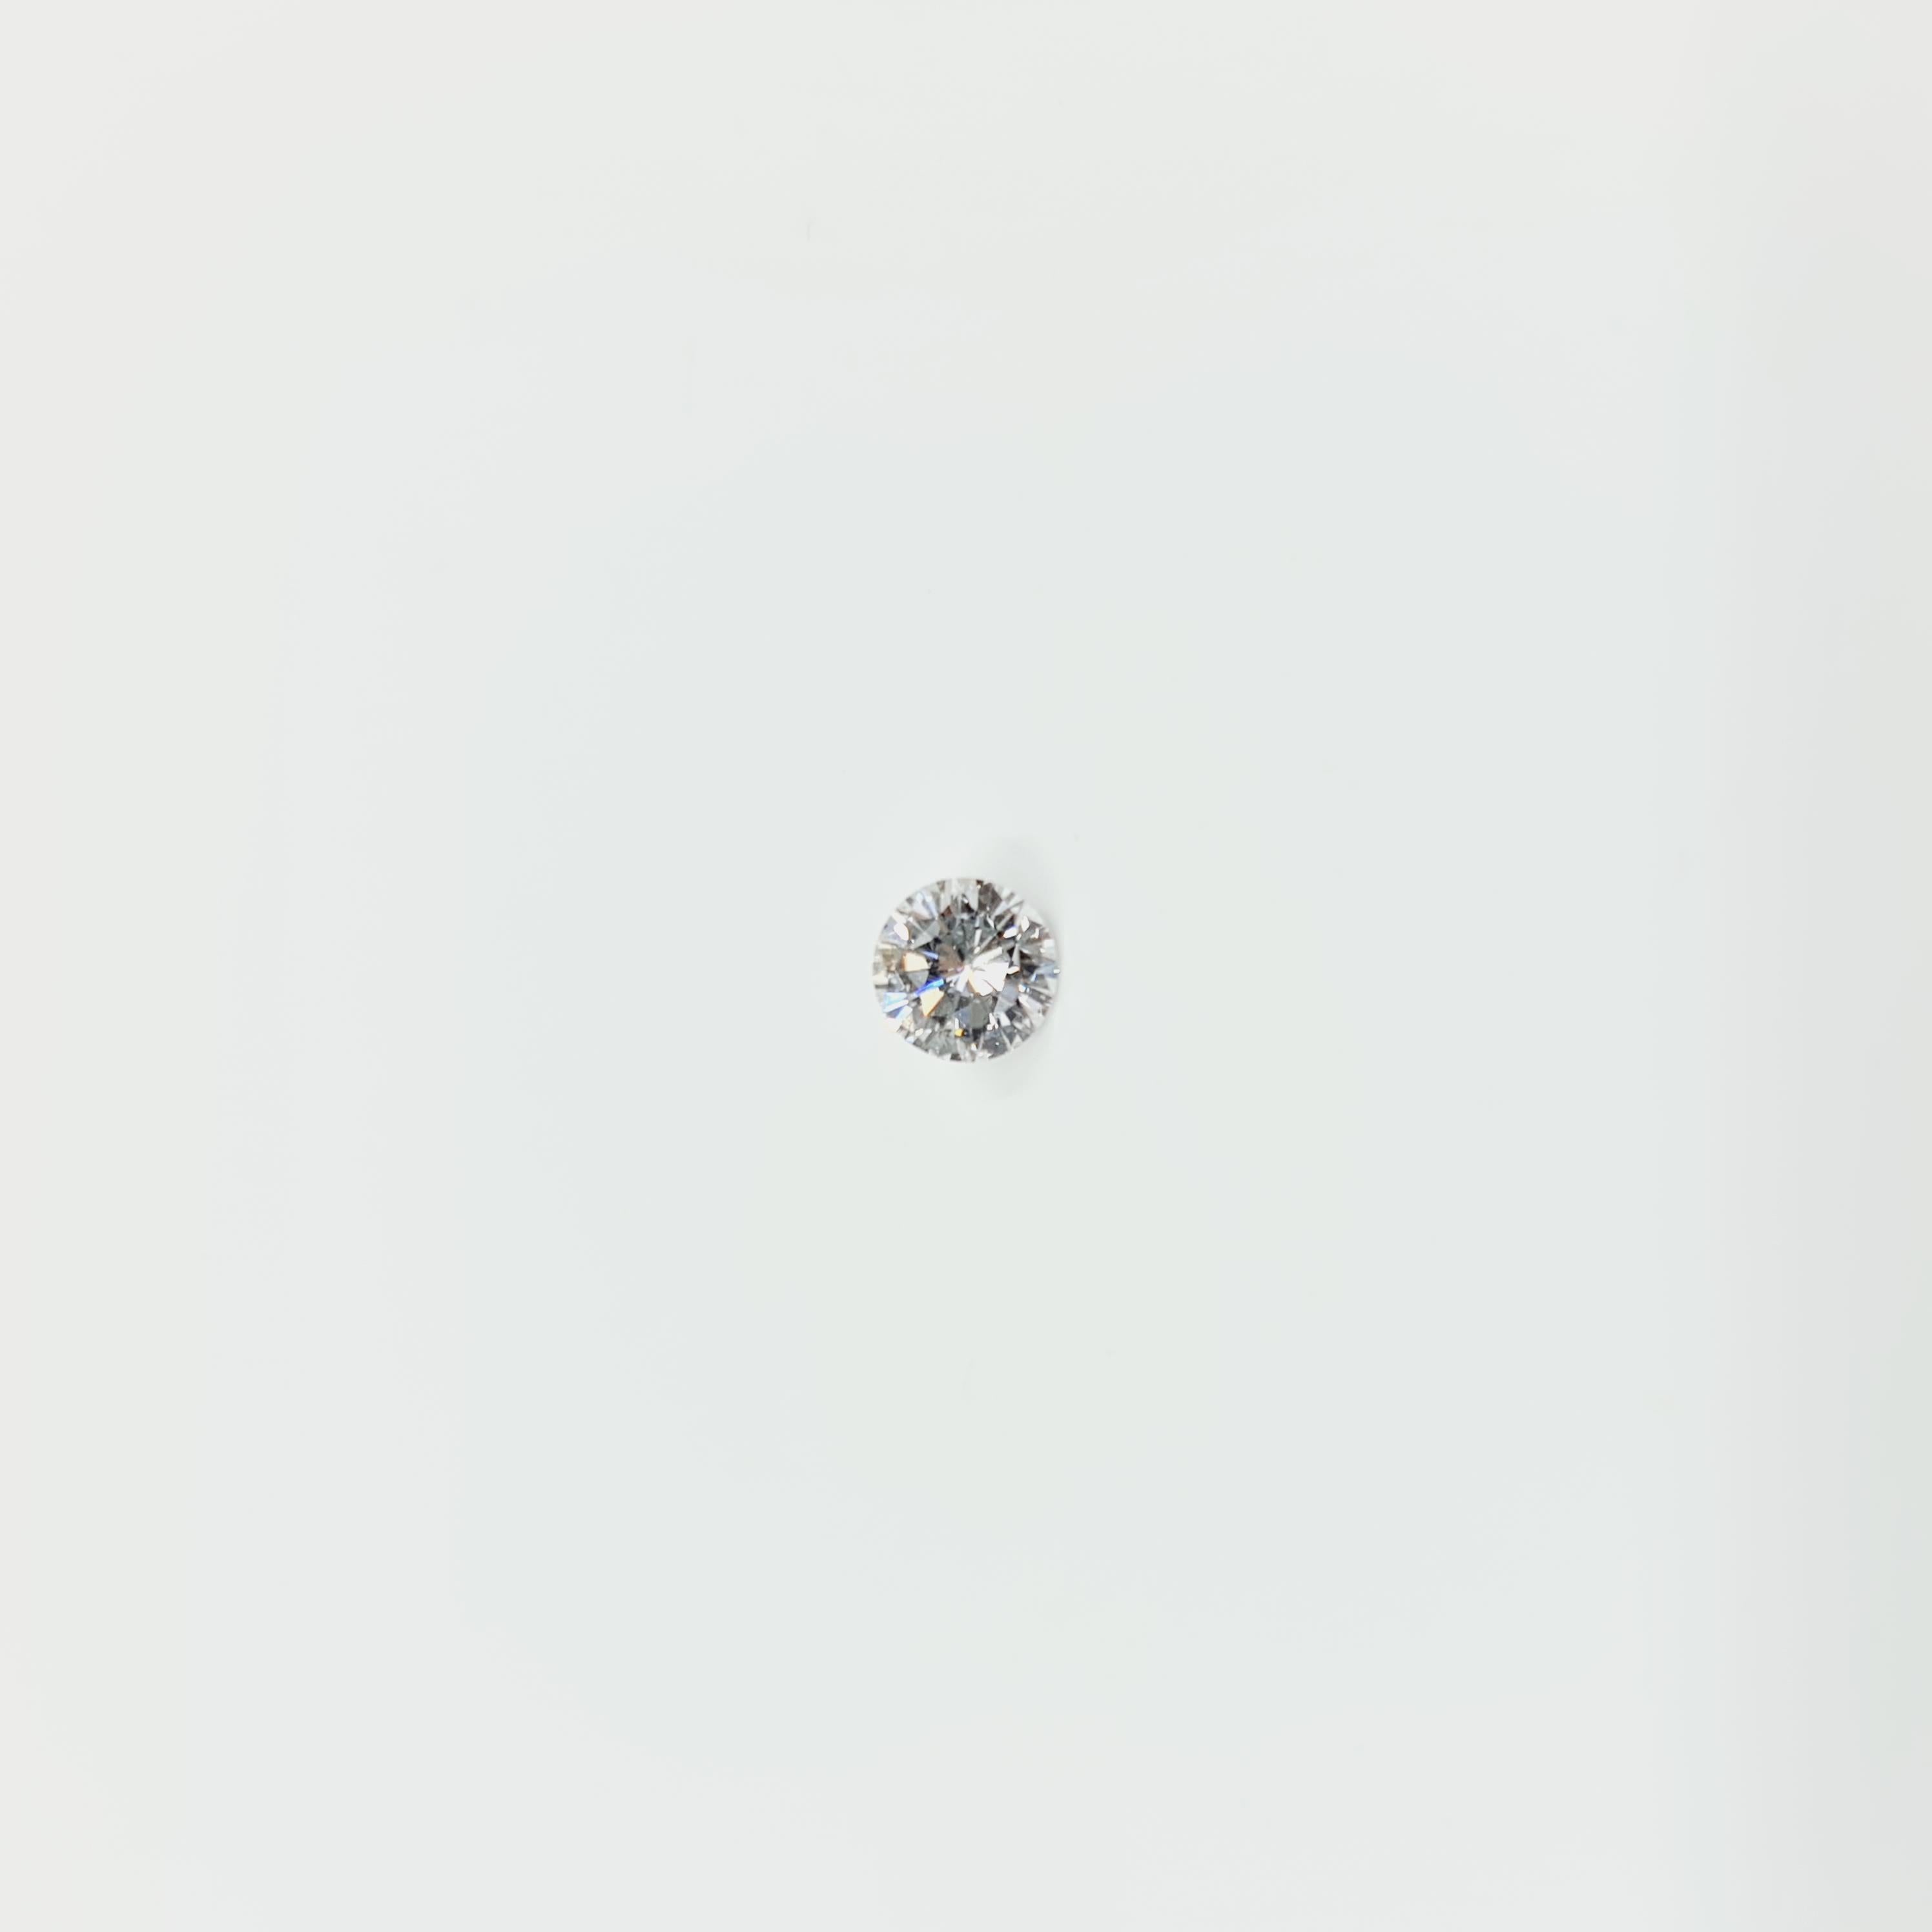 GIA Certified Diamond 0.34 D/SI2 Solitaire Ring 750 Gold

Fine Brilliant Cut, Solitaire Diamond Ring in 18k Whitegold.
Four Prong Setting. High Mounted Diamond. 
Size 54(any size possible).

5 C`s:
Certificate: GIA
Carat: 0,34ct
Color: D
Clarity: